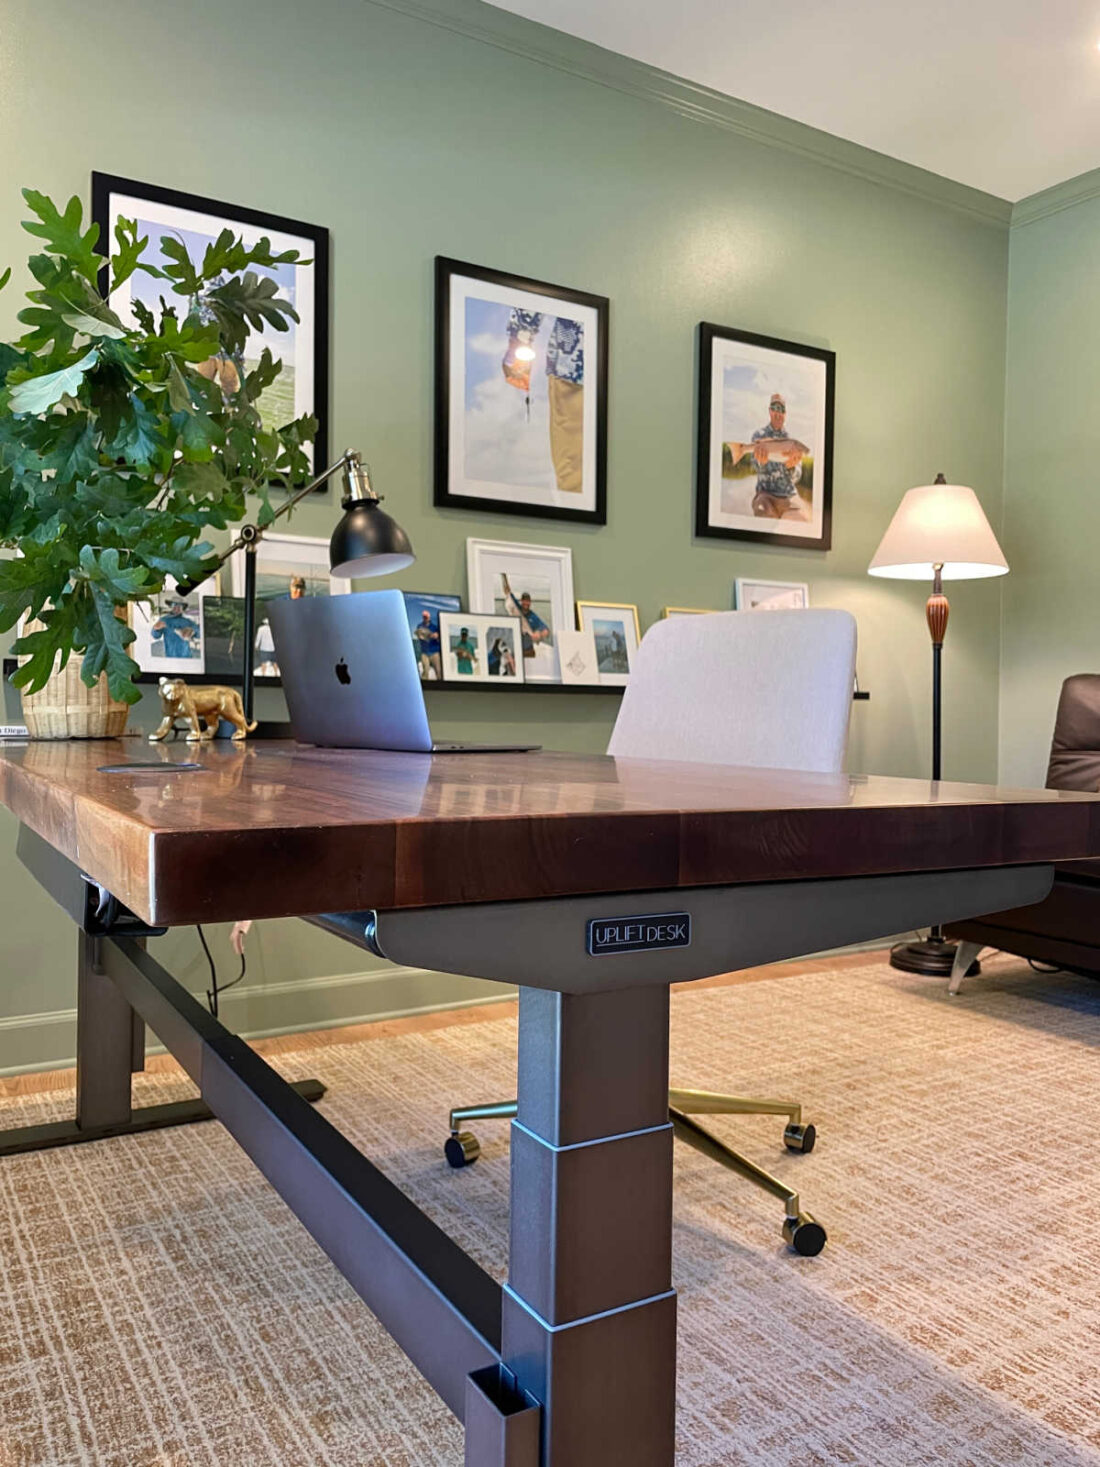 Home office photo gallery and uplift desk